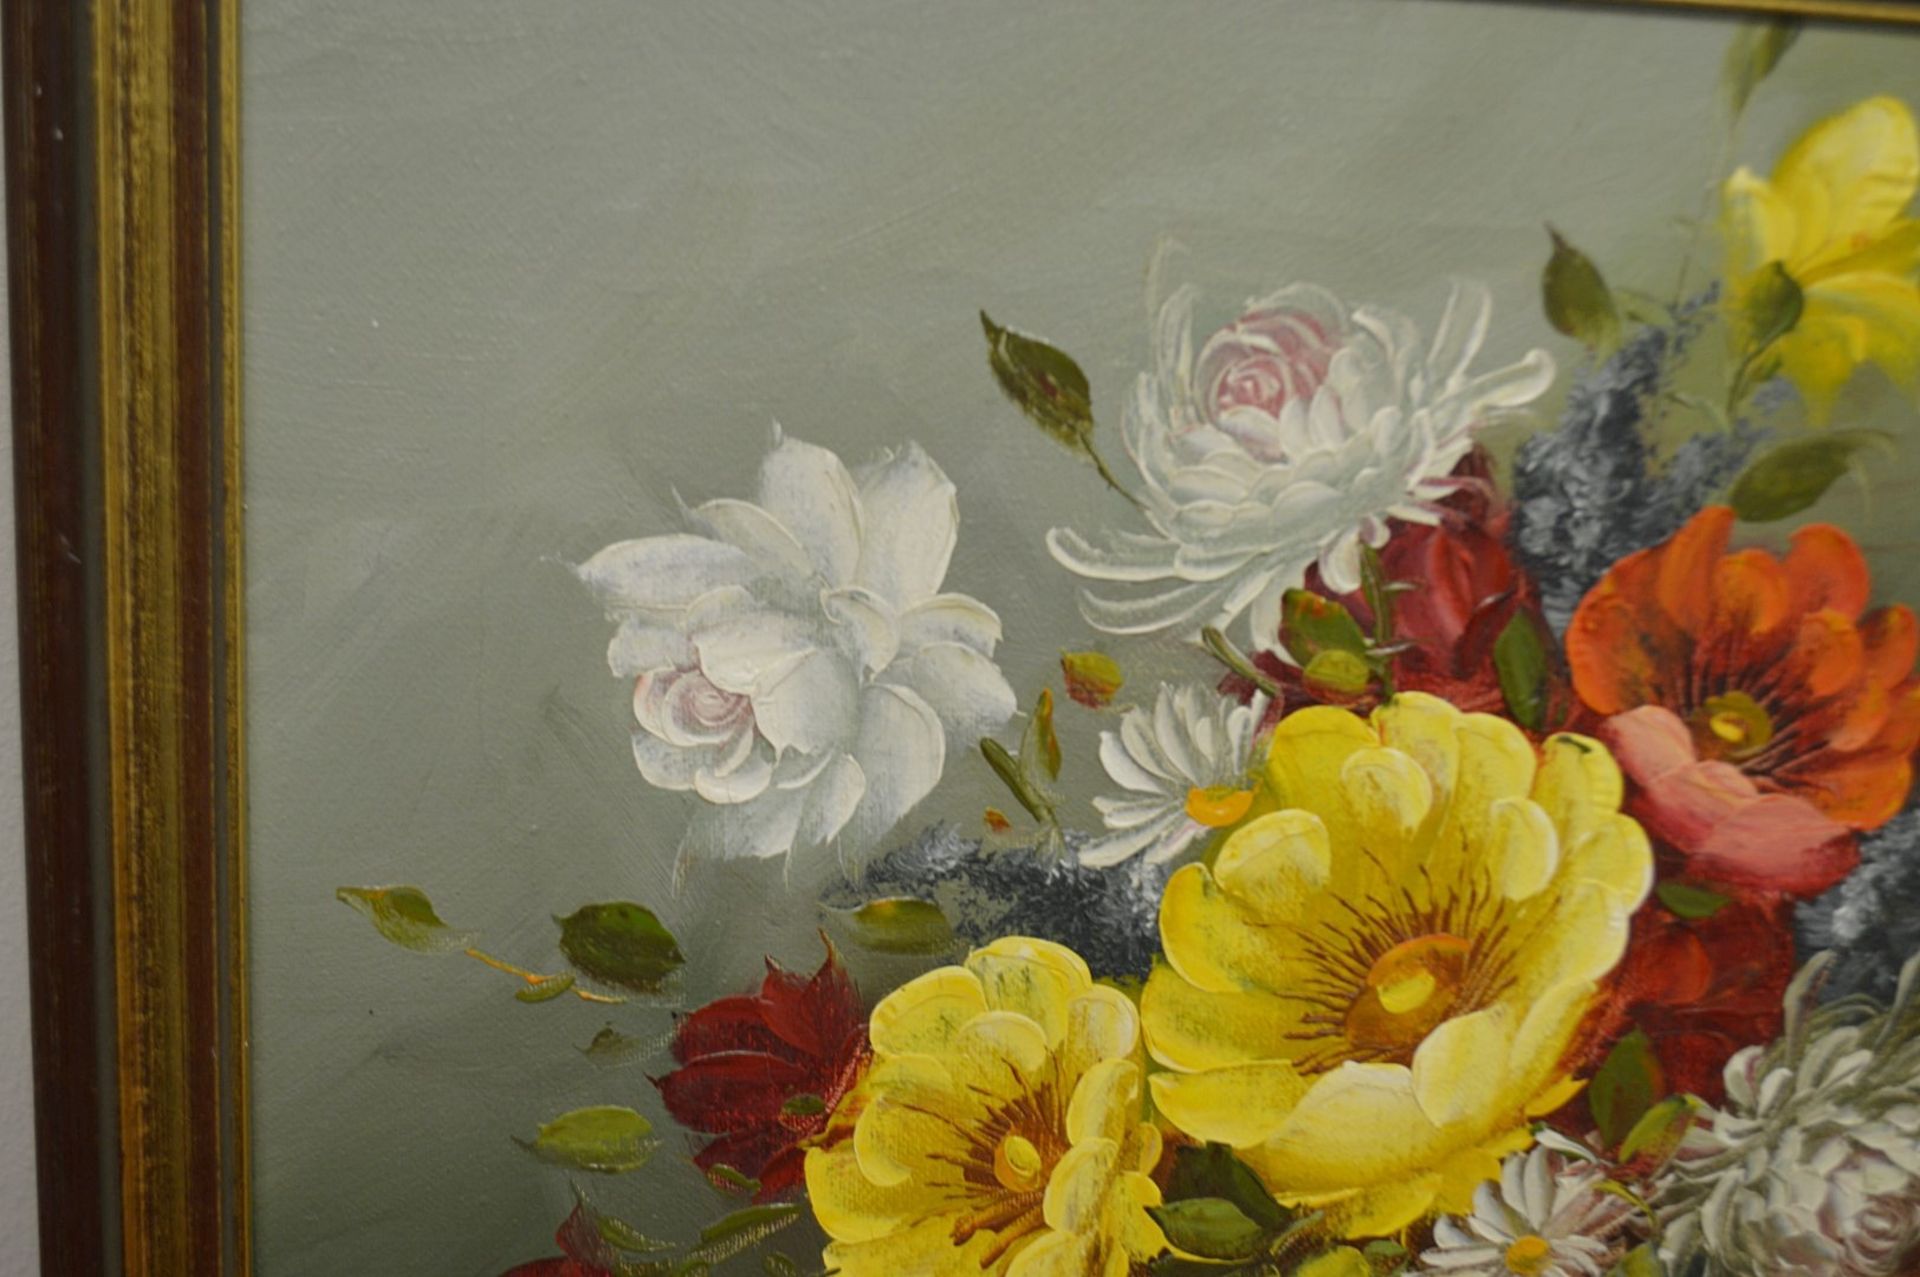 1 x Original Oil Painting Of Flowers On Canvas - Signed By The Artist - Dimensions: 36 x 46cm - Ref: - Image 6 of 6